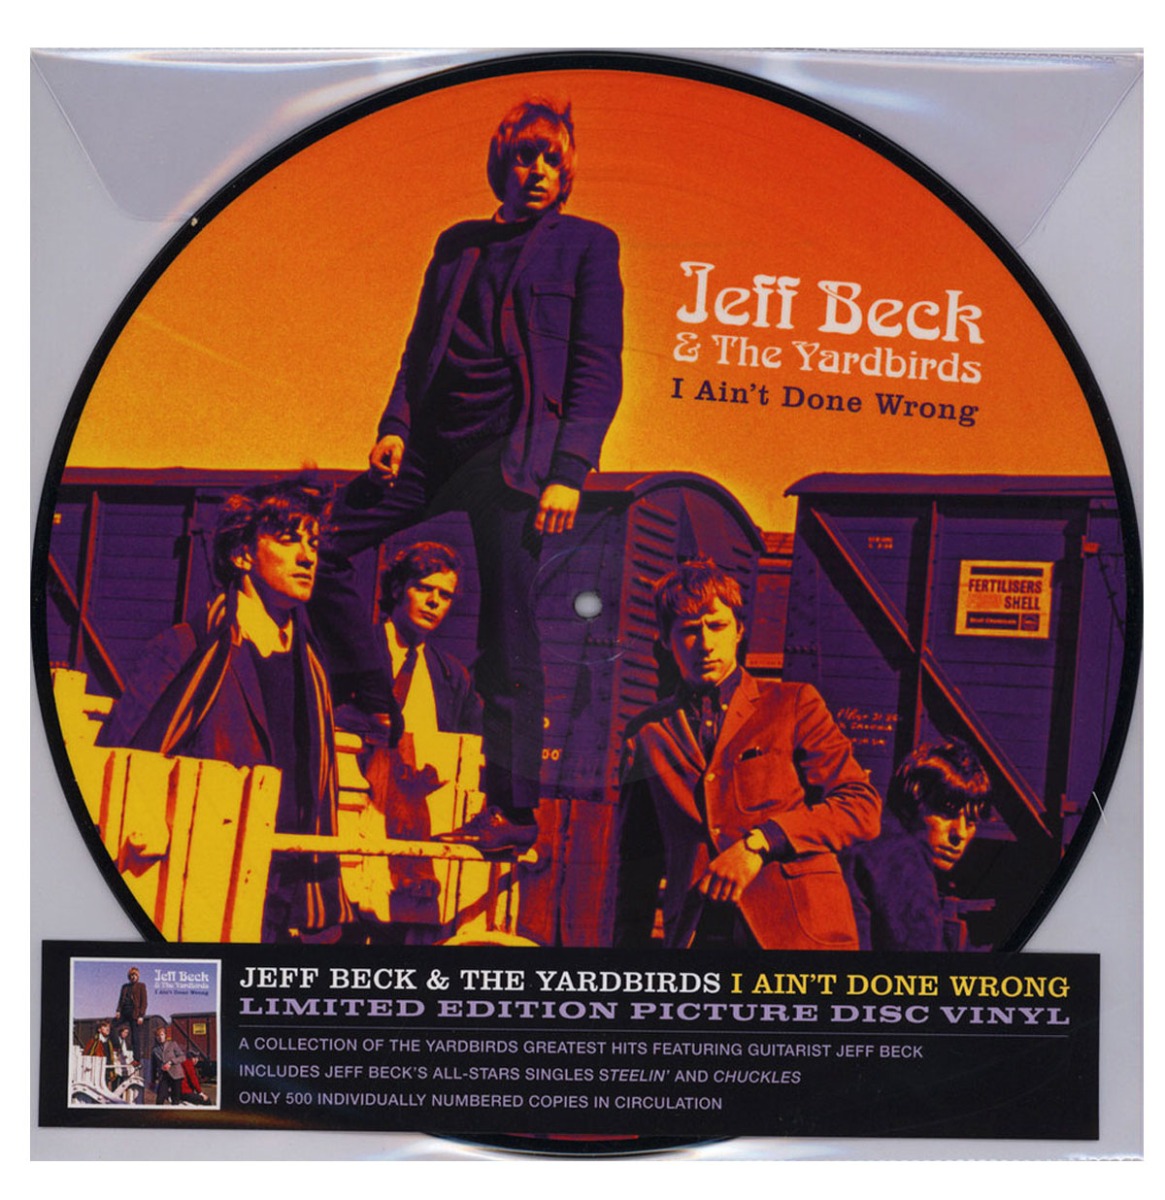 Jeff Beck & The Yardbirds - I Ain't Done Wrong Picture Disc Edition